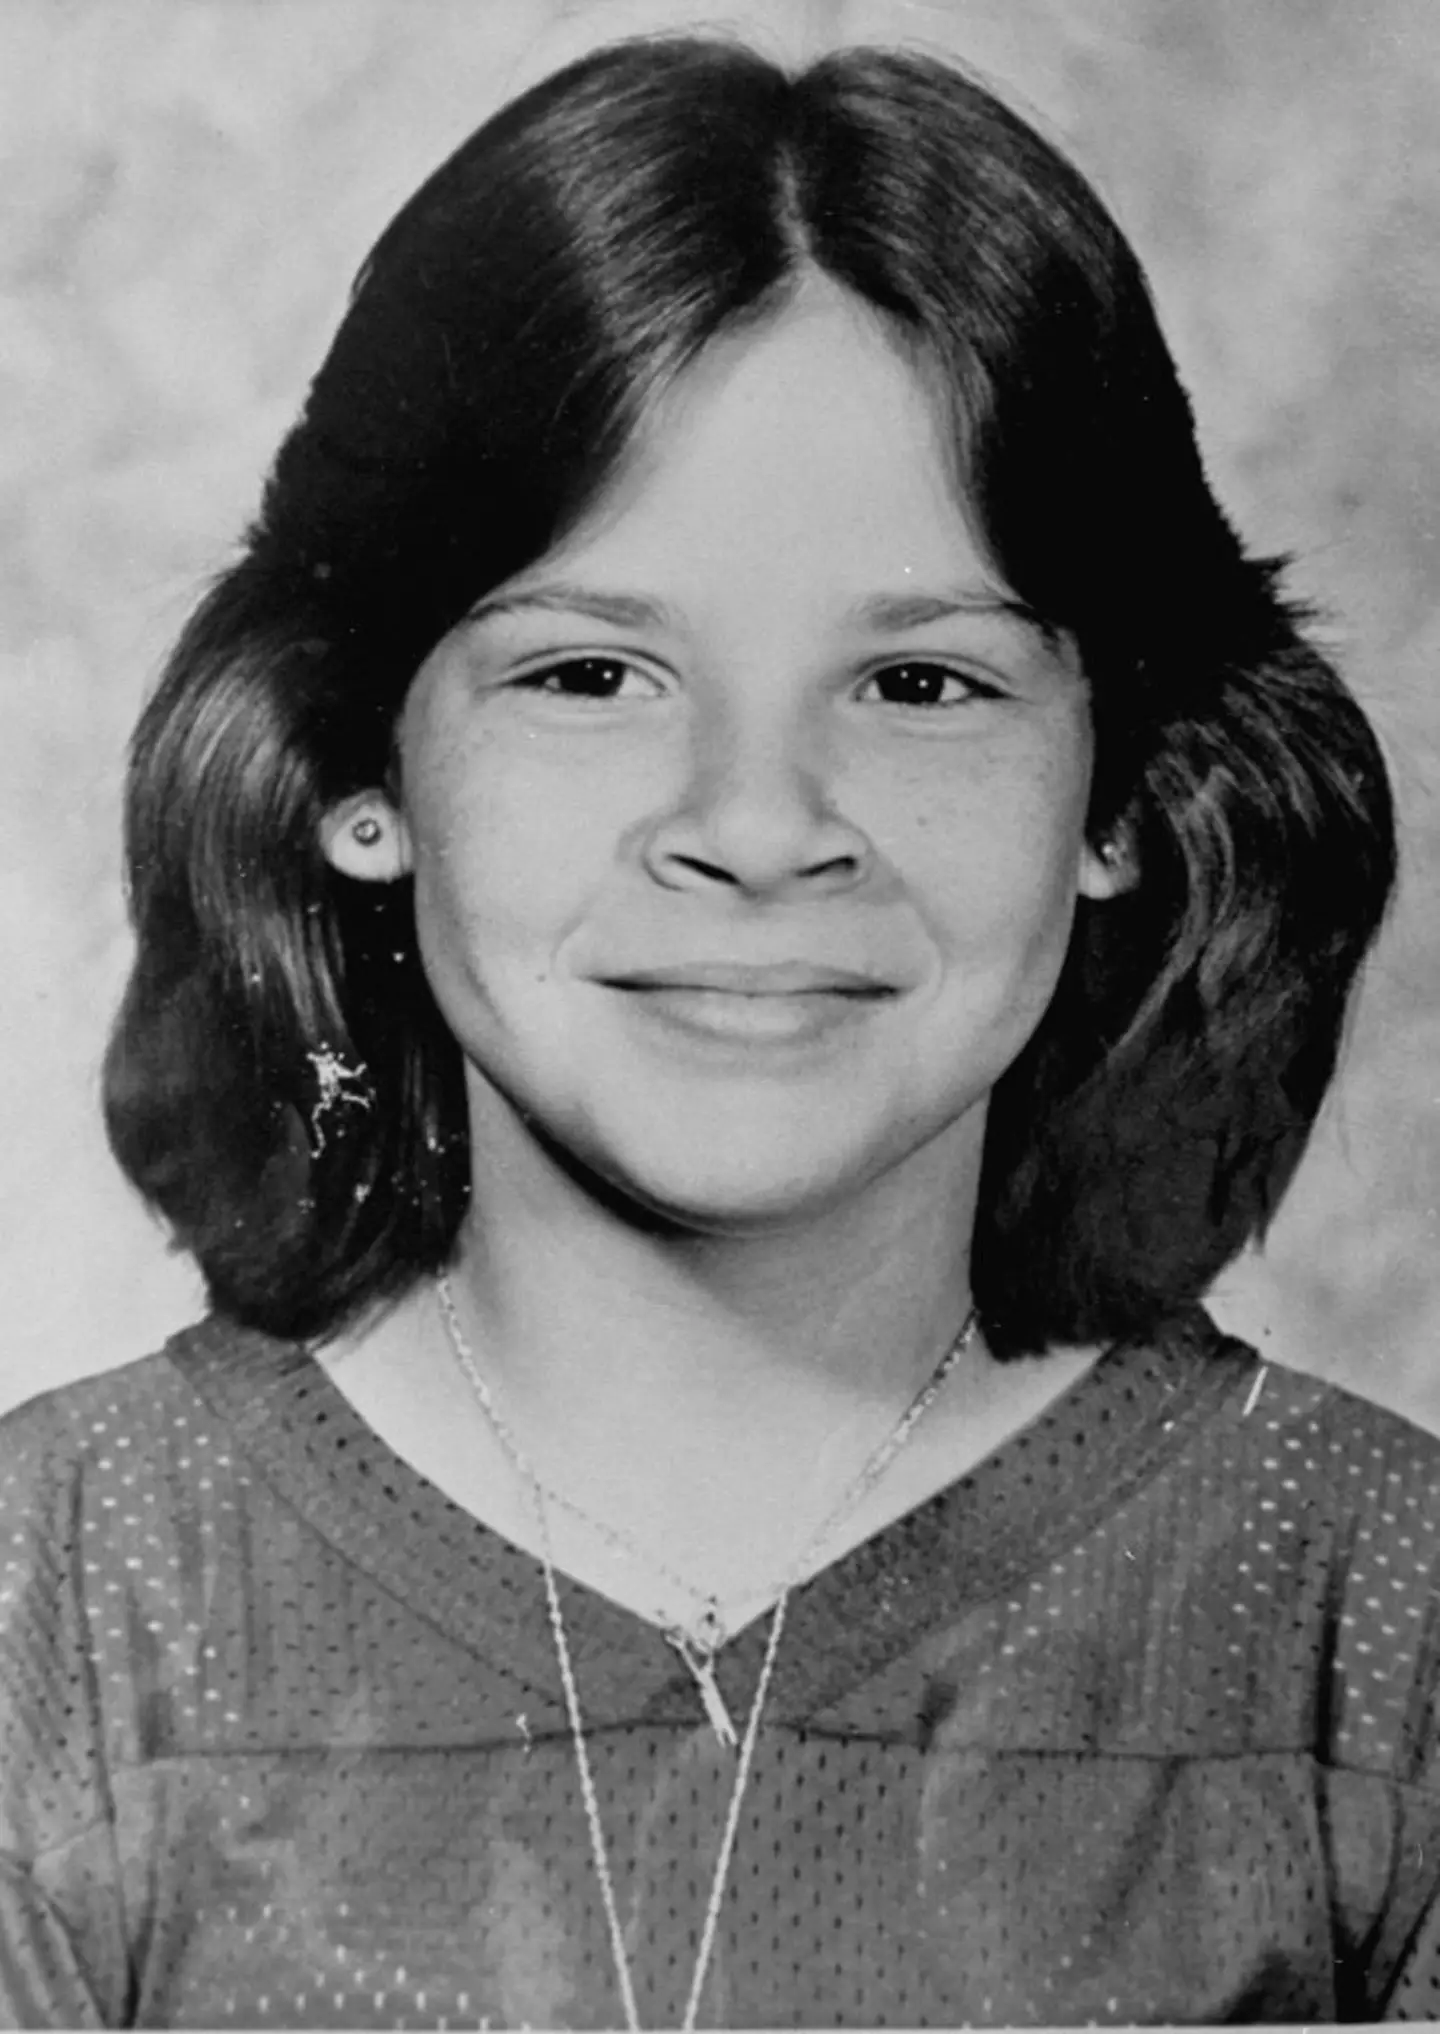 12-year-old Kimberly Leach is thought to be Bundy's final victim before his arrest in 1978.